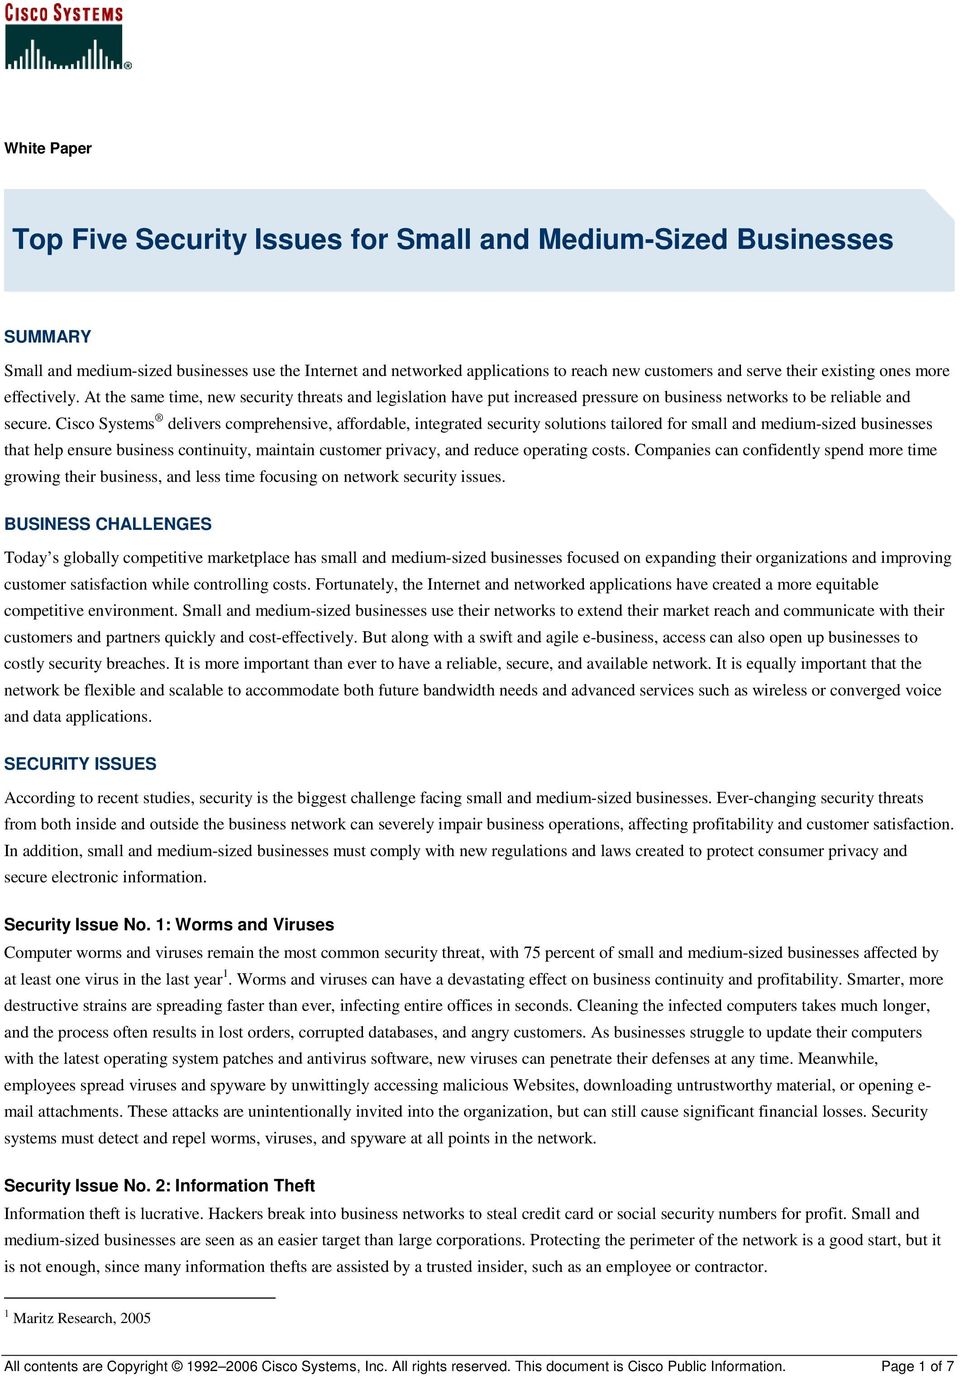 Cisco Systems delivers comprehensive, affordable, integrated security solutions tailored for small and medium-sized businesses that help ensure business continuity, maintain customer privacy, and